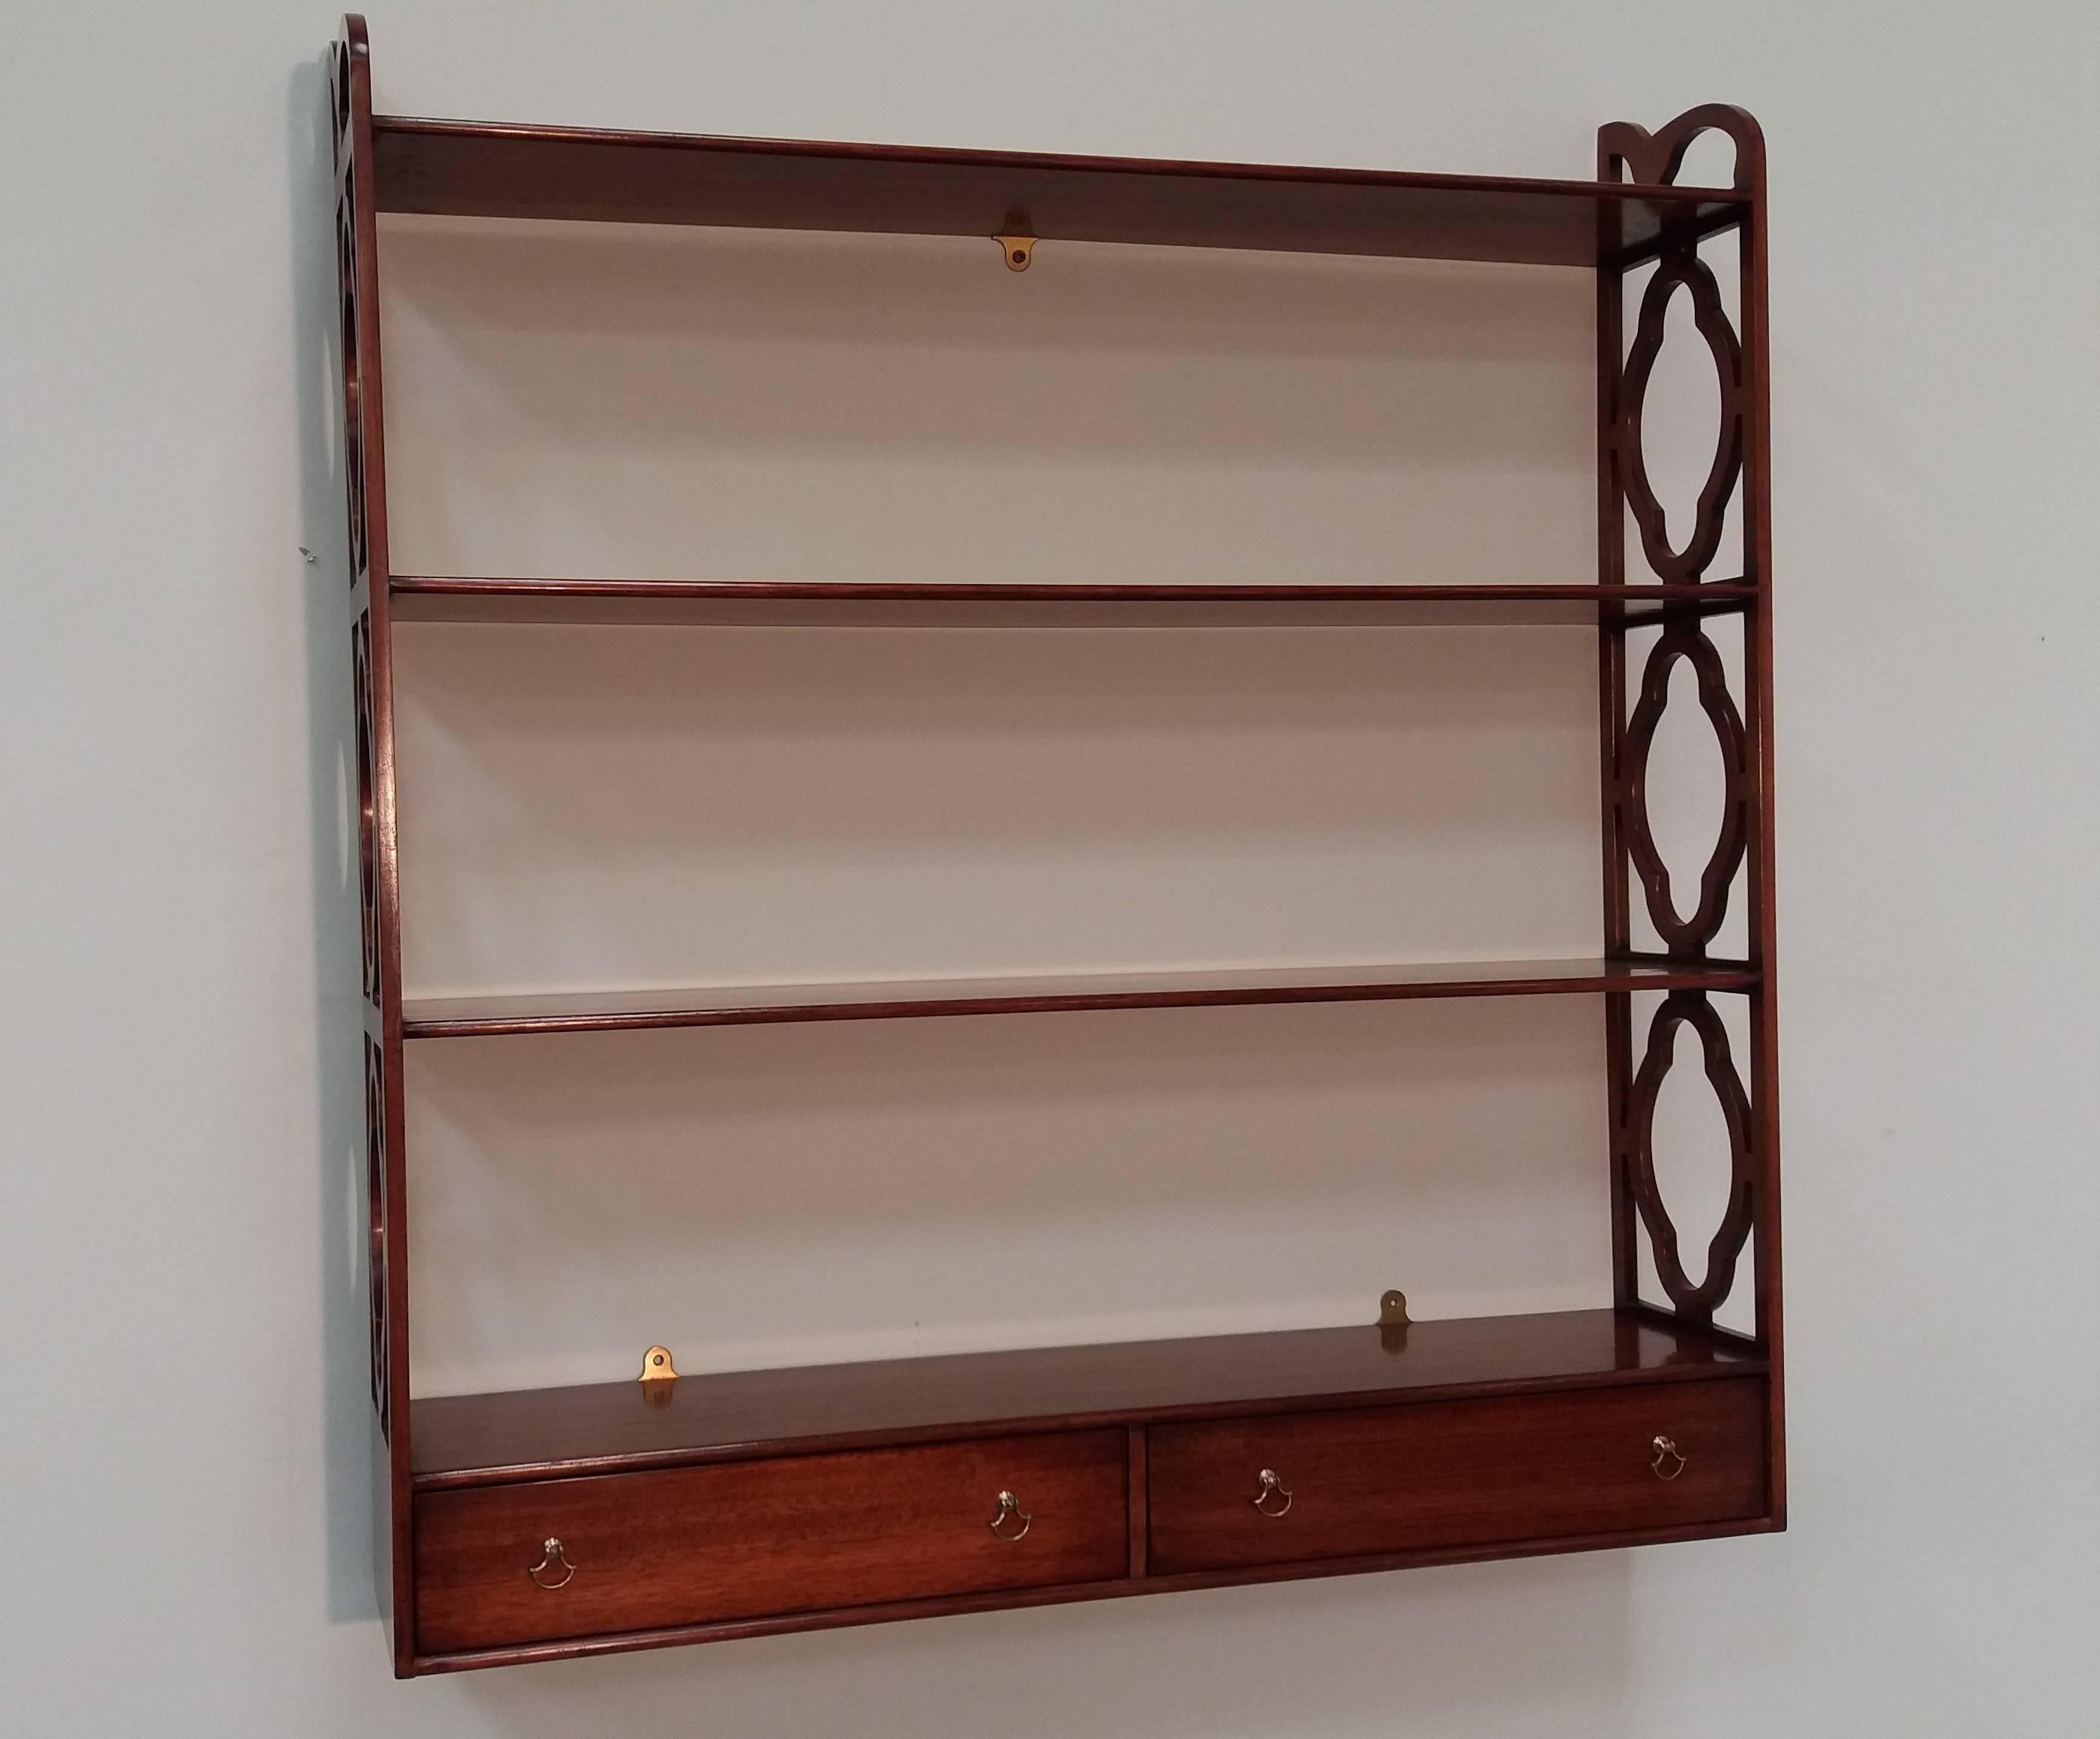 Solid mahogany wall-mounted bookshelf with hand-cut fretwork sides. Three shelves over two drawers with brass drop-pull handles.

Arthur Brett is a long-established English cabinet making business producing high quality furniture, specializing in